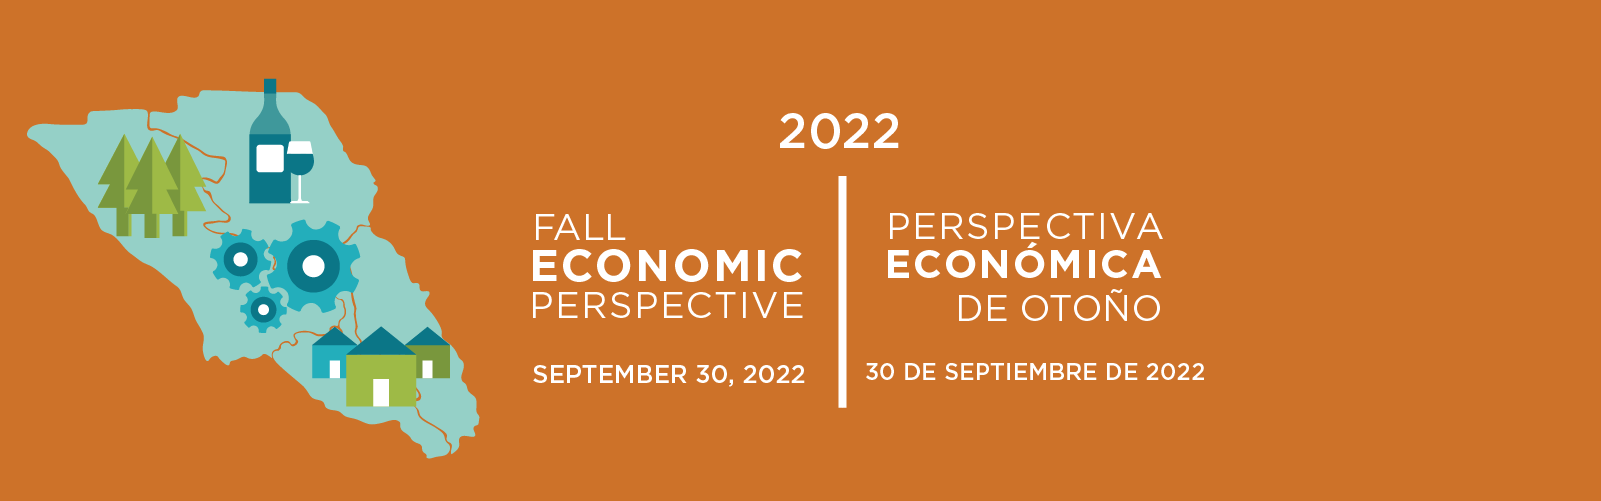 2022 Fall Economic Perspective September 30 2022